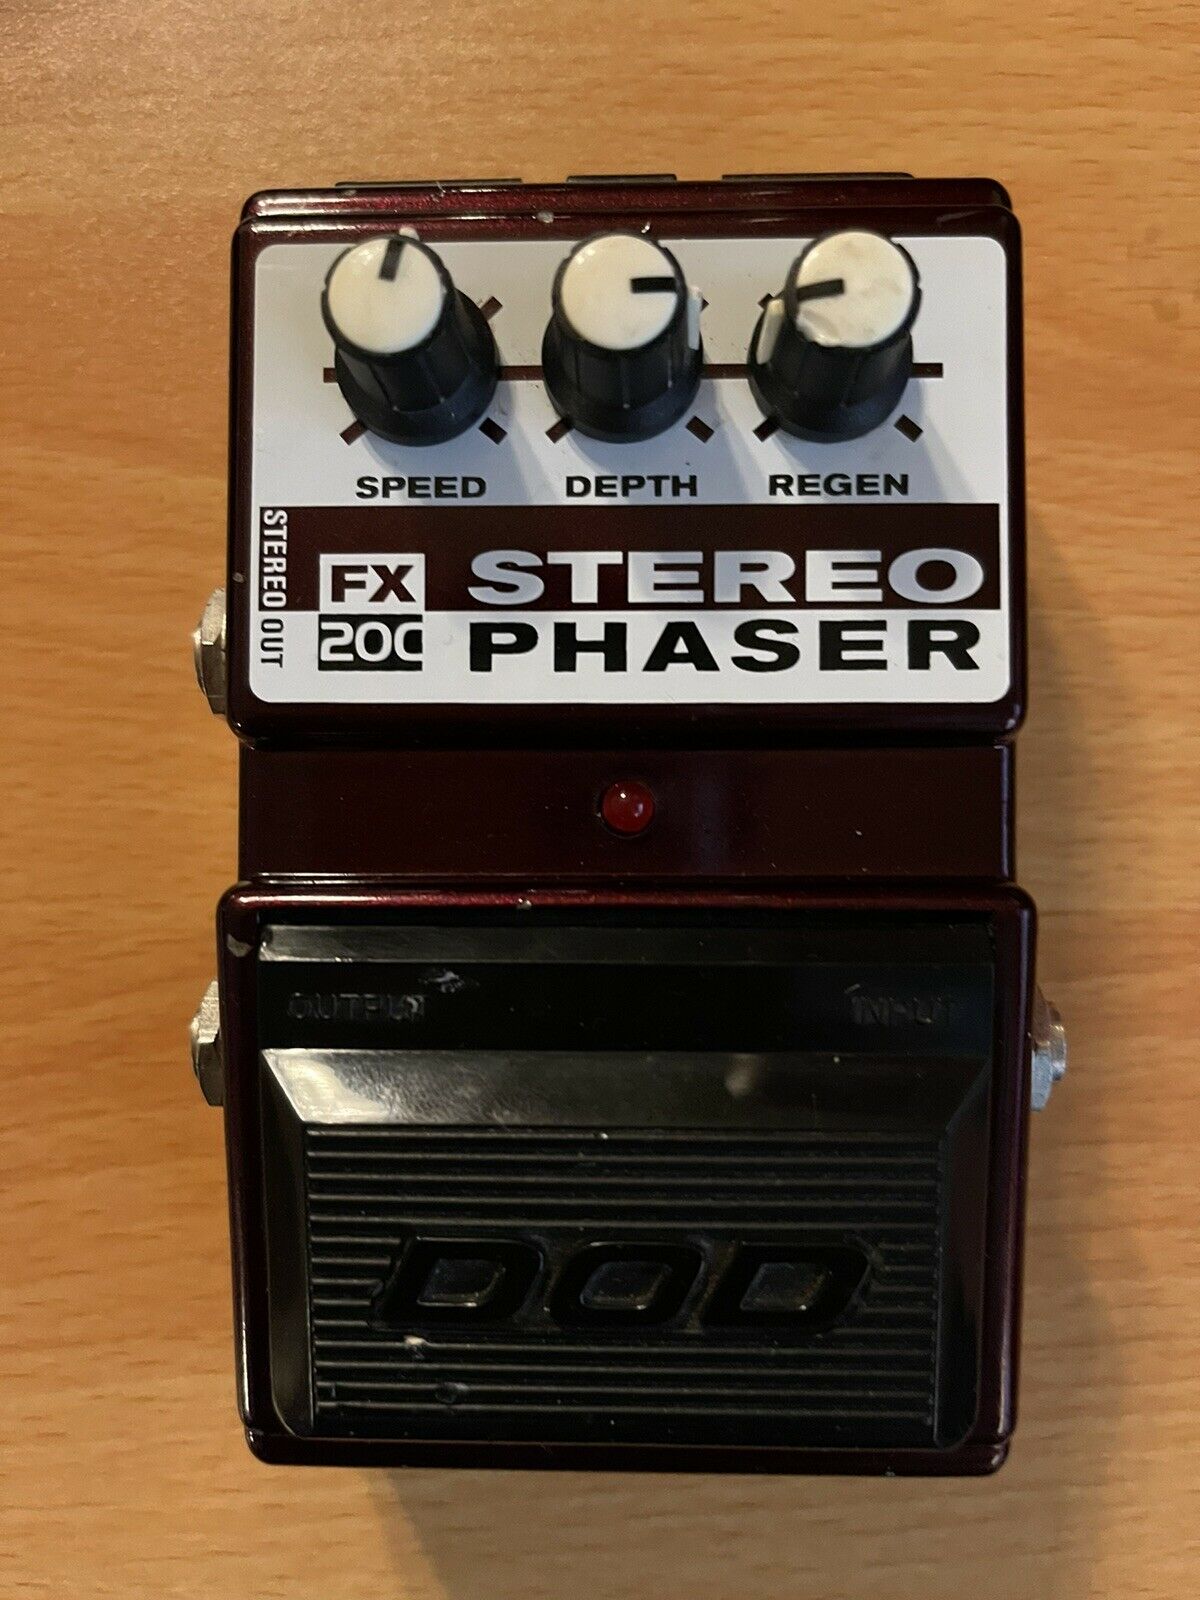 Dod Digitech Fx20c Stereo Phaser Analog Phase Shifter Rare Guitar Effect Pedal